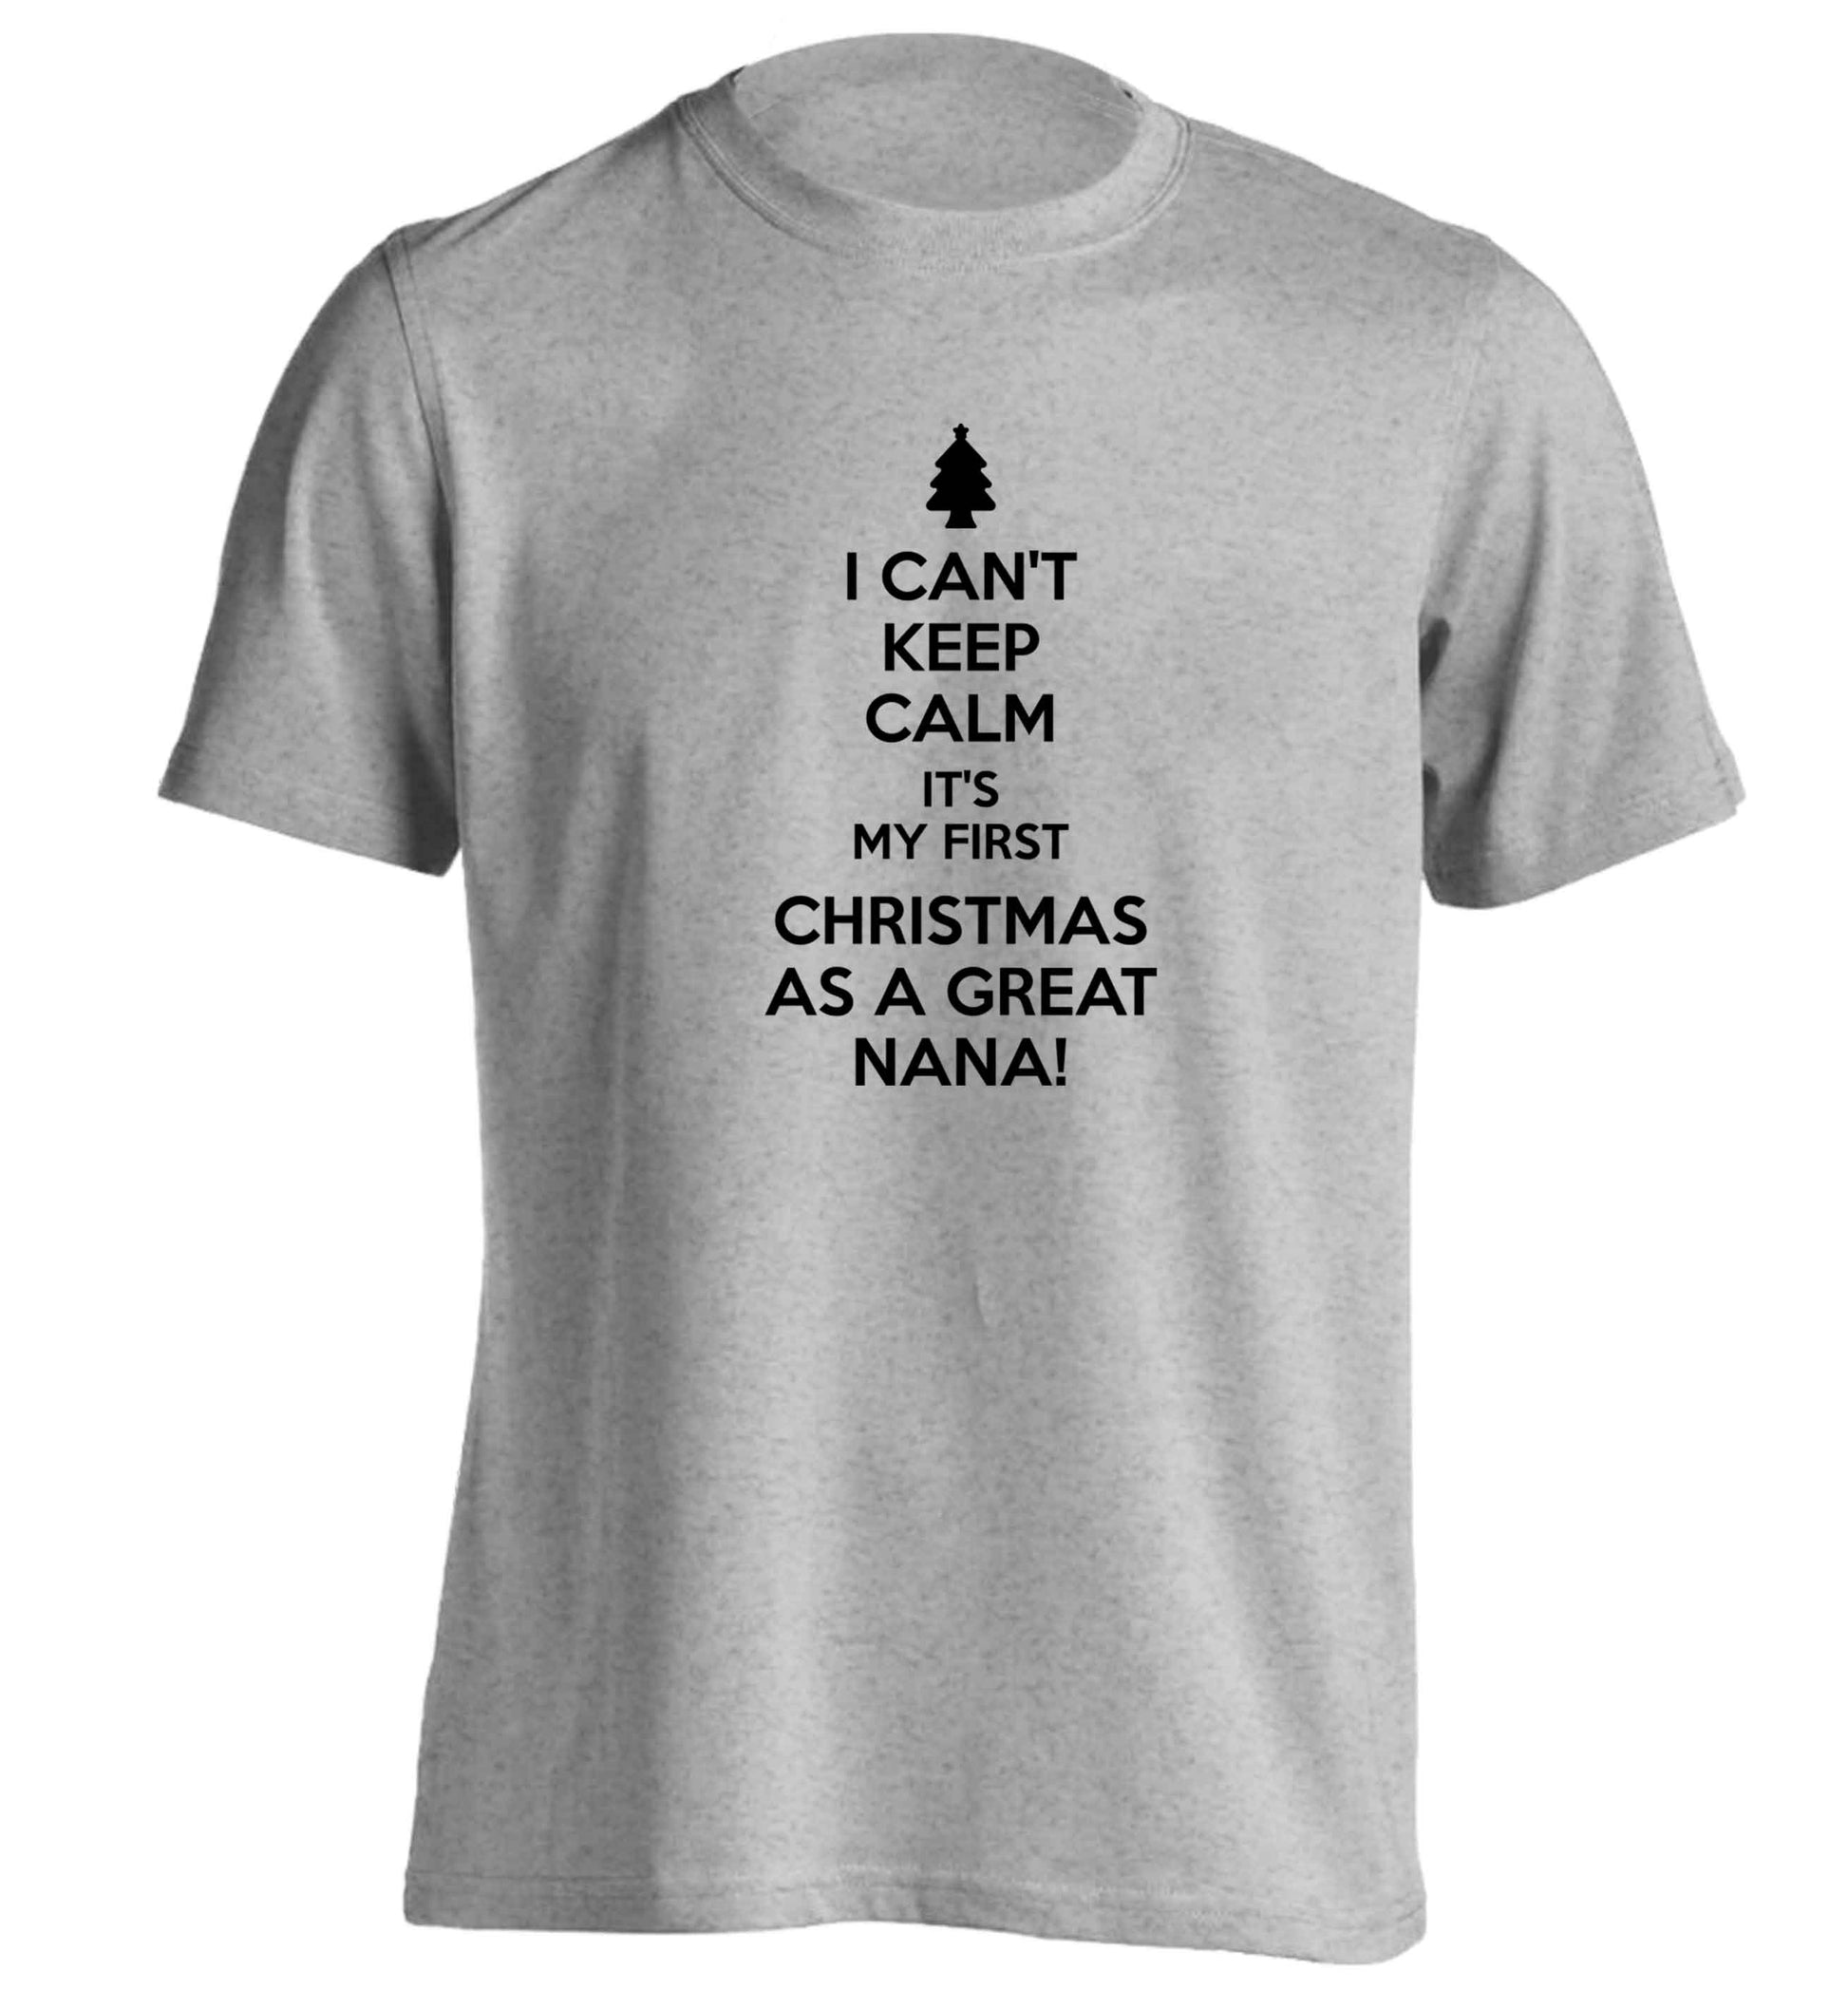 I can't keep calm it's my first Christmas as a great nana! adults unisex grey Tshirt 2XL